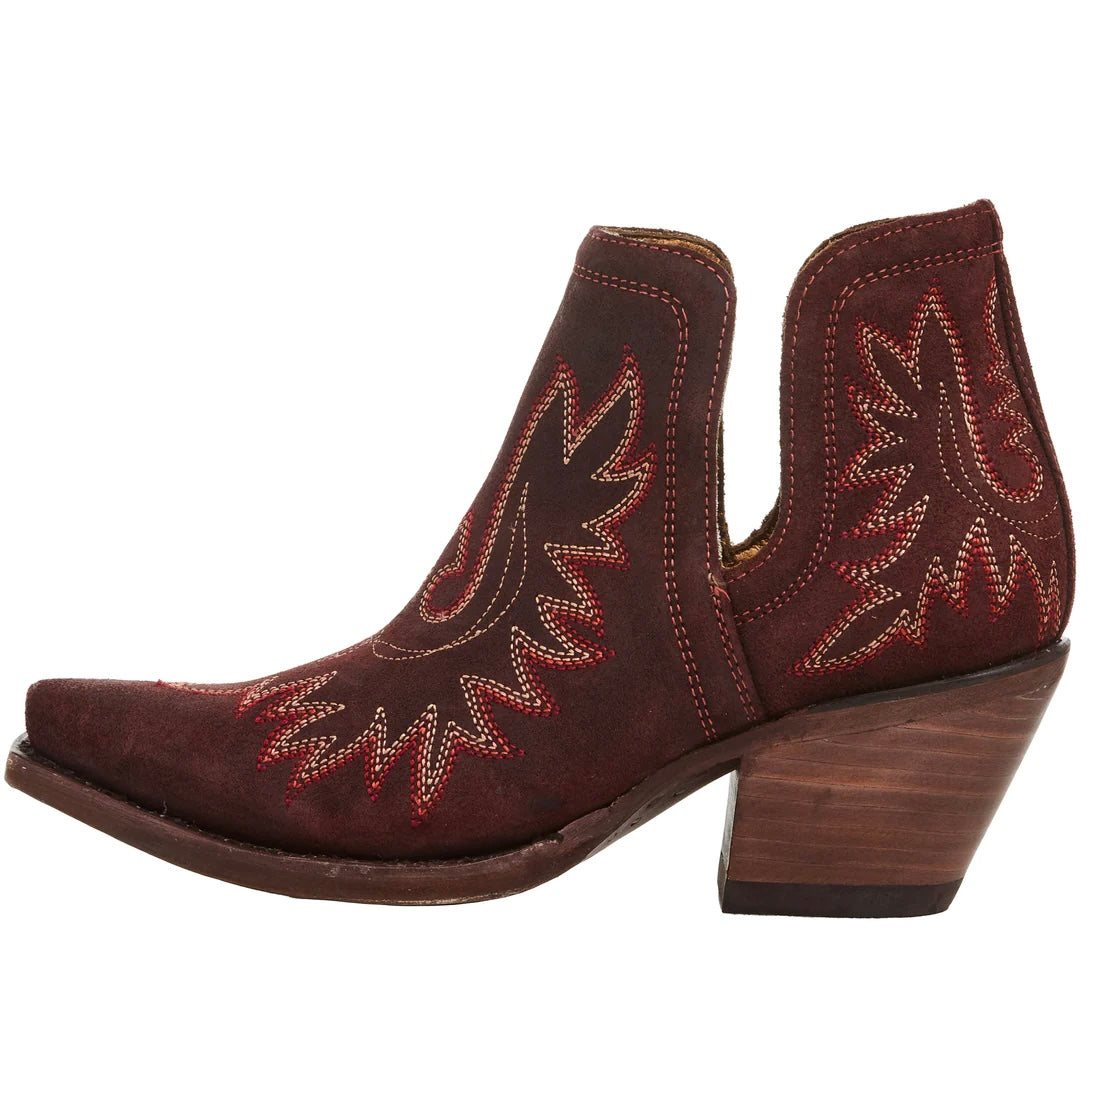 The Dixon by Ariat - Merlot Suede